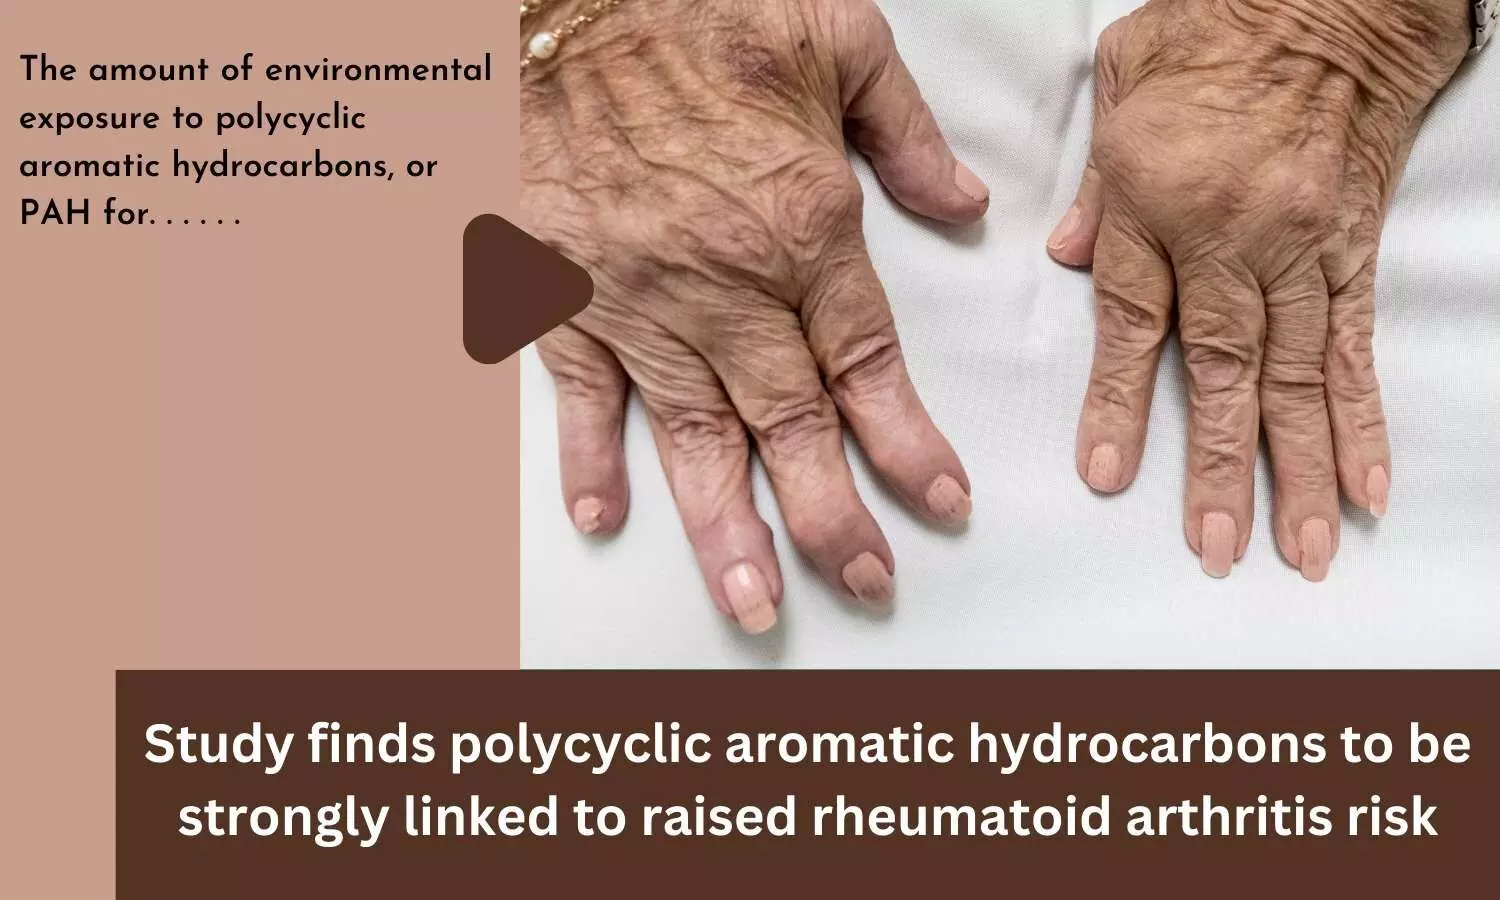 Study finds polycyclic aromatic hydrocarbons to be strongly linked to raised rheumatoid arthritis risk